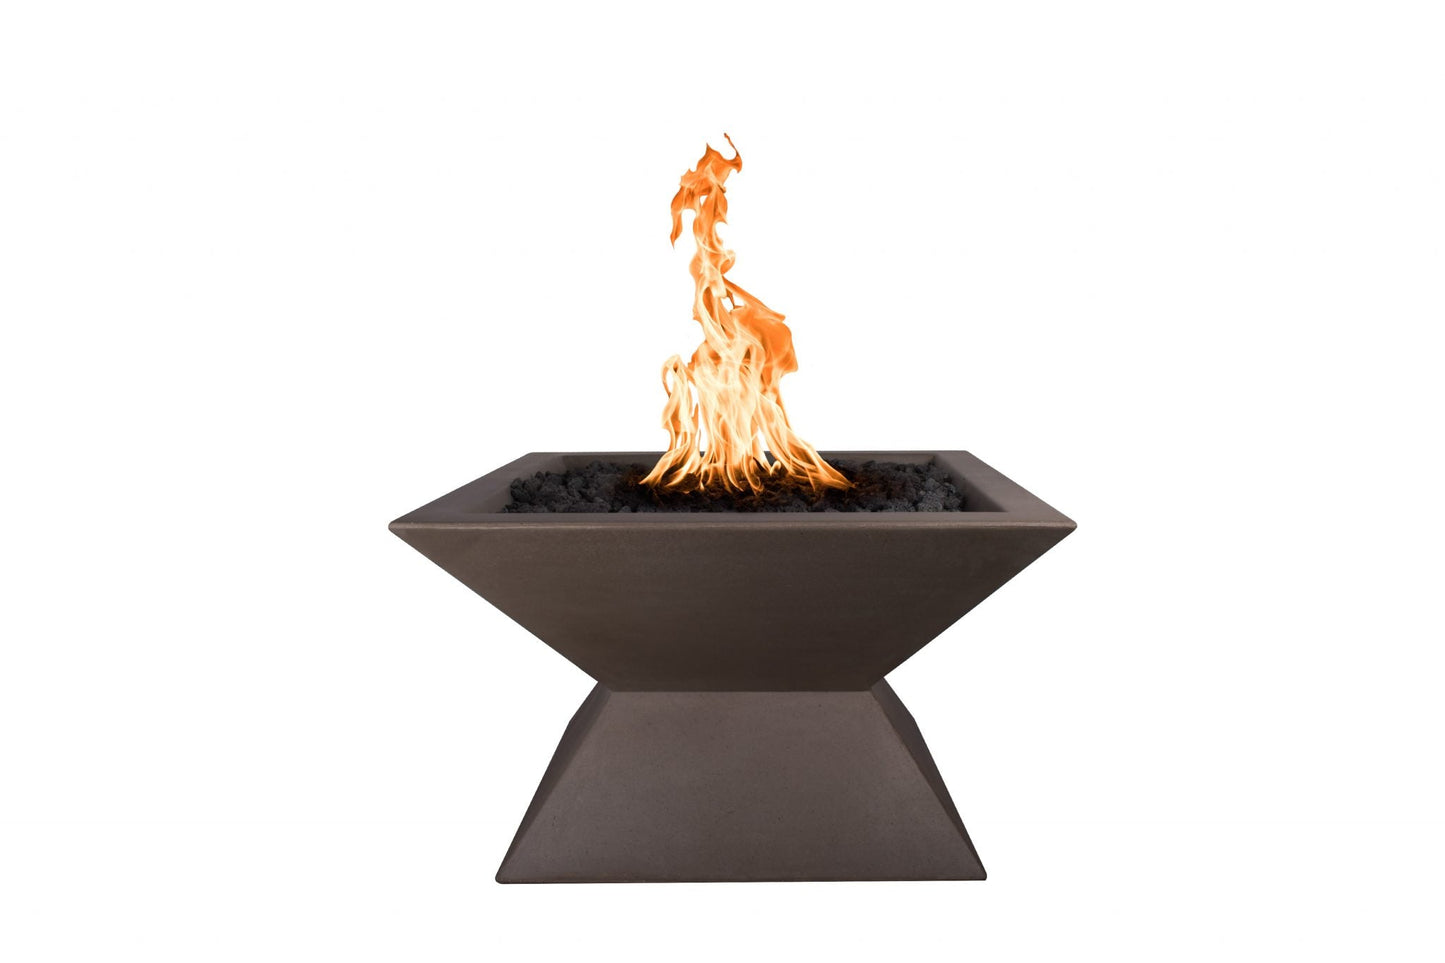 The Outdoor Plus Square Uxmal 30" Stainless Steel Liquid Propane Fire Pit with 110V Electronic Ignition